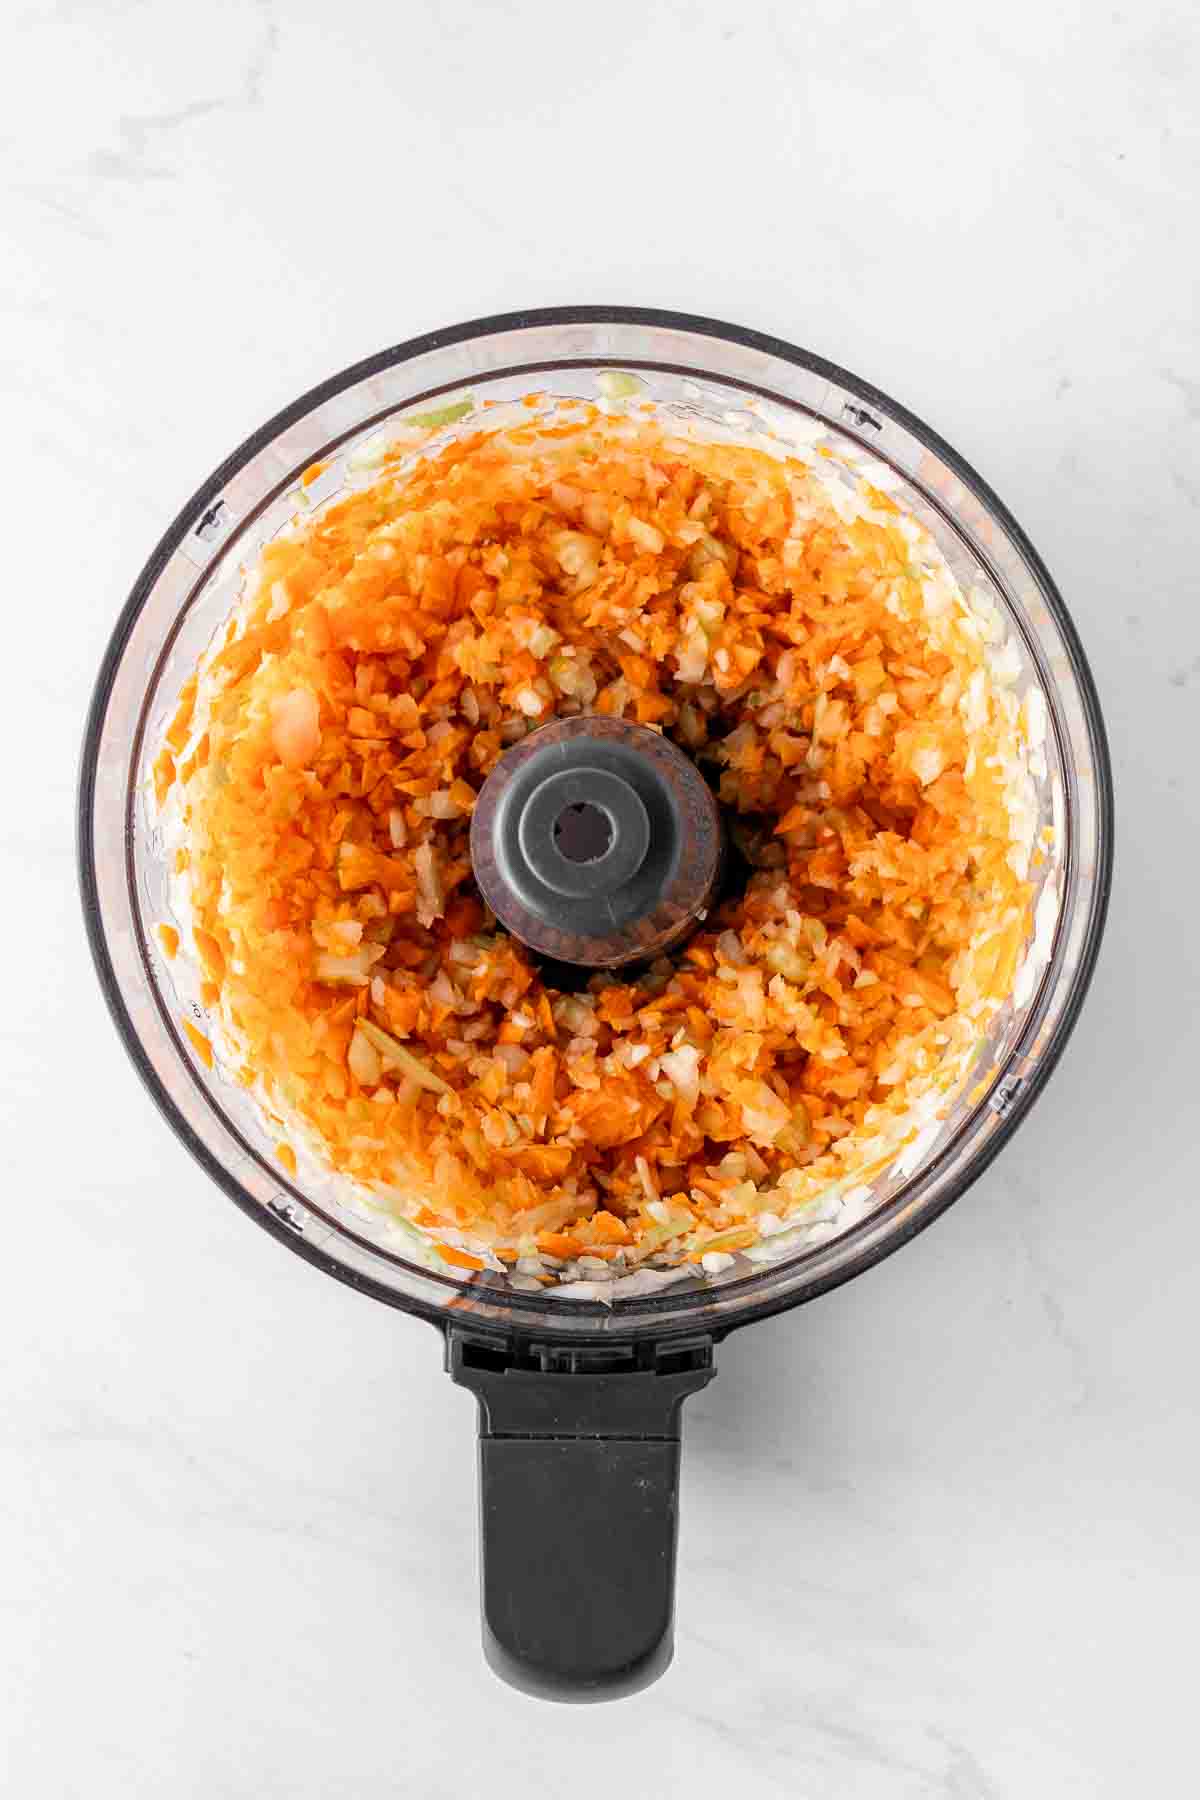 Chopped carrots, celery, and onion in food processor bowl.